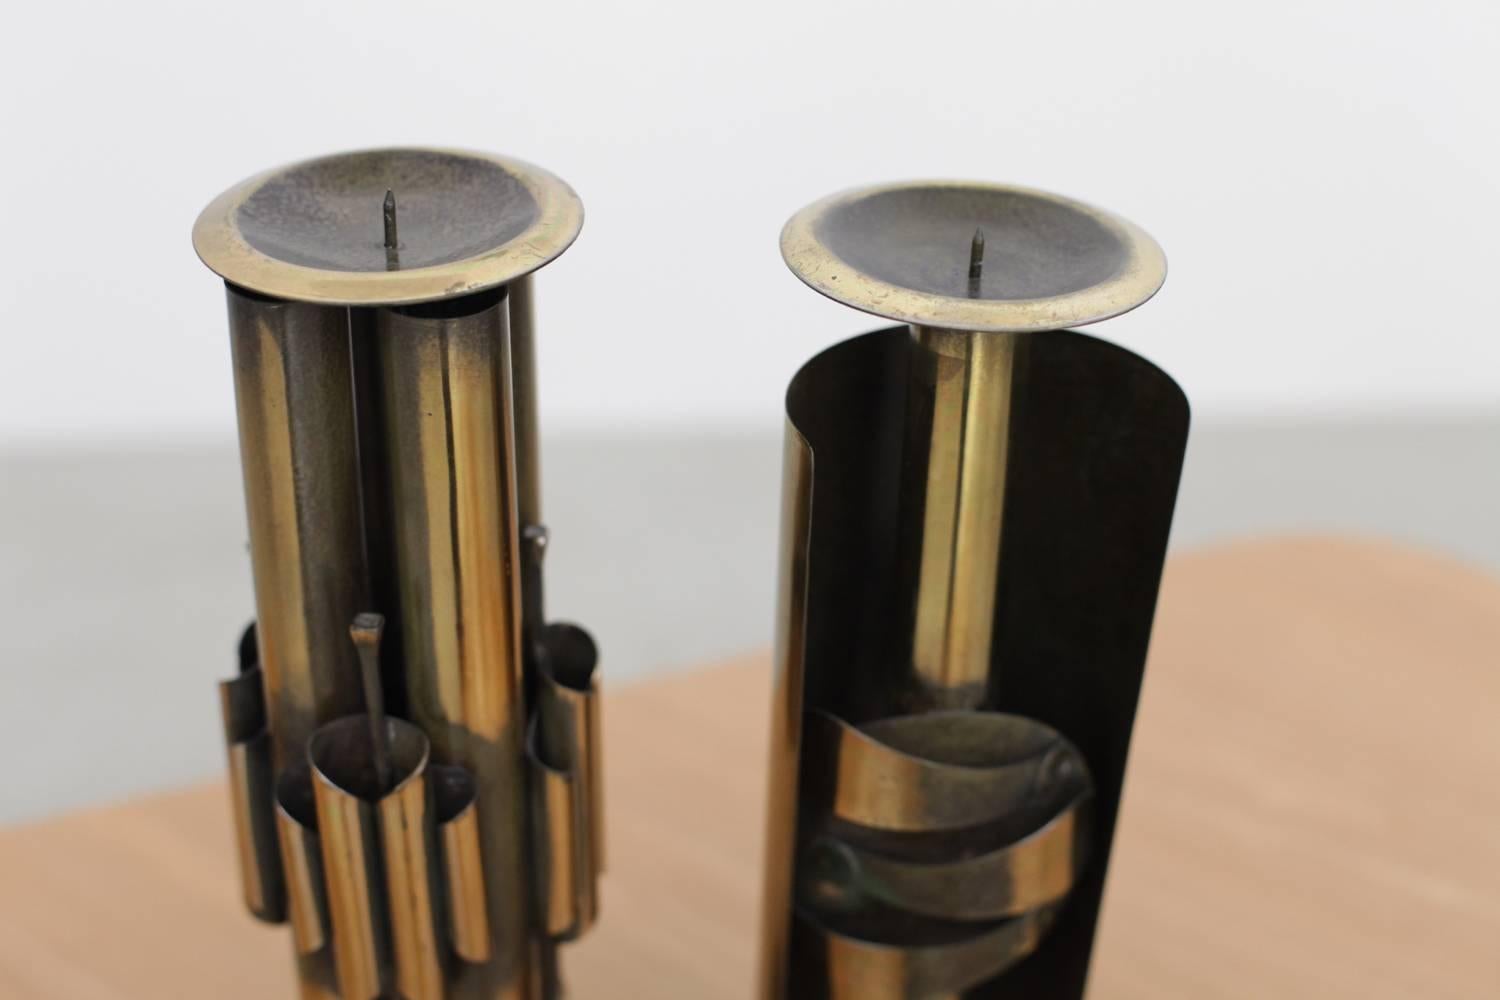 Very brutal pair of candle stands in brass in excellent condition.

